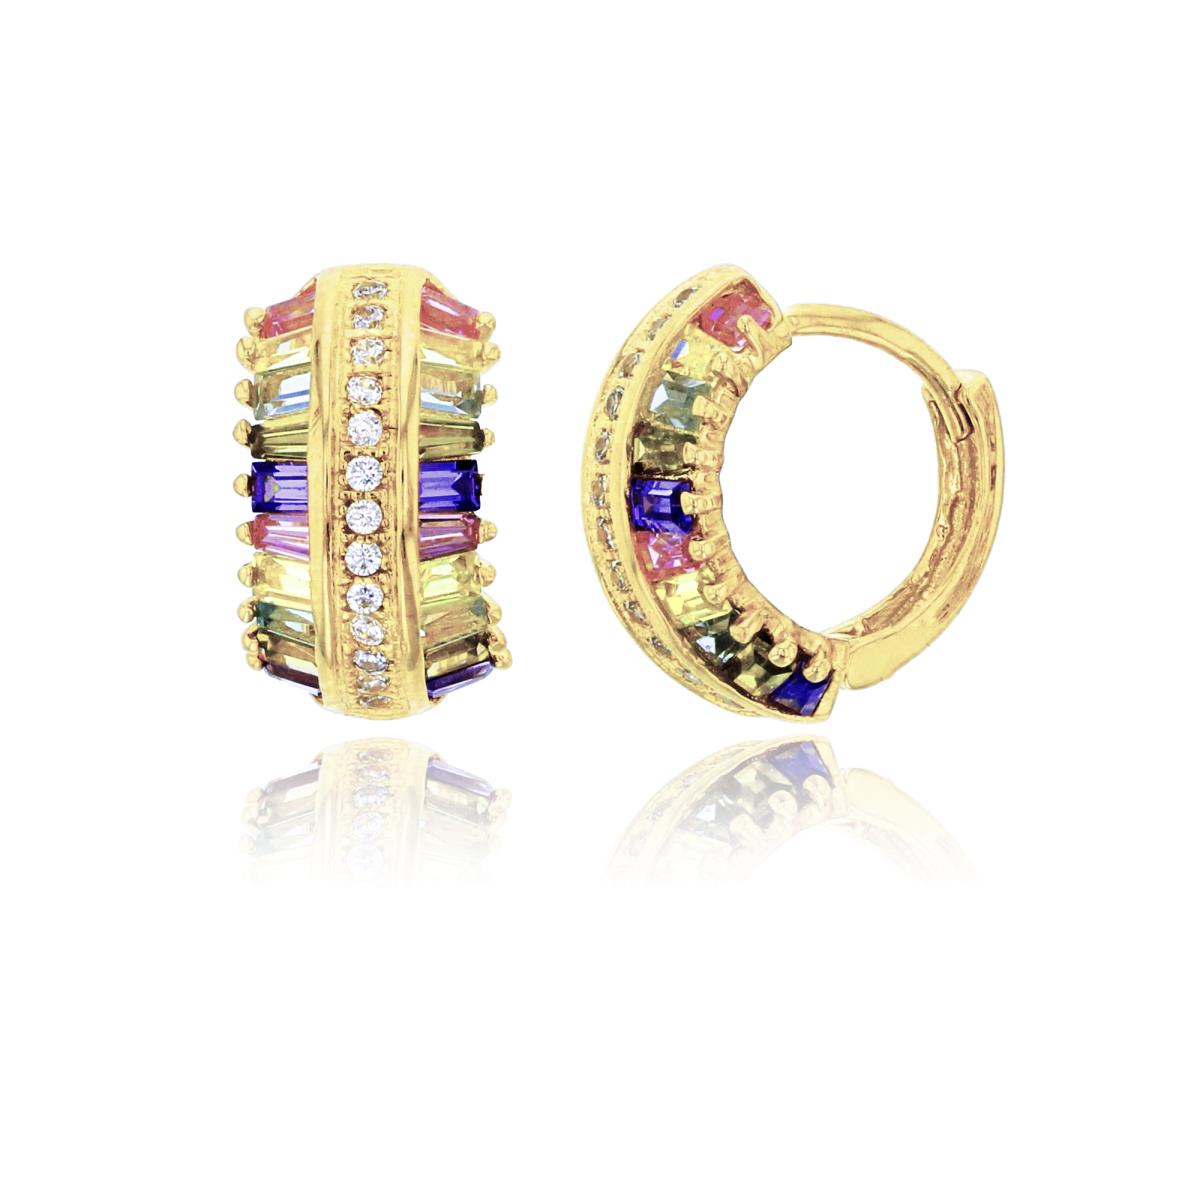 14K Yellow Gold 3-Row Pave White Rd Cut CZ & Multi Color Baguette Side Stones Huggie Earring